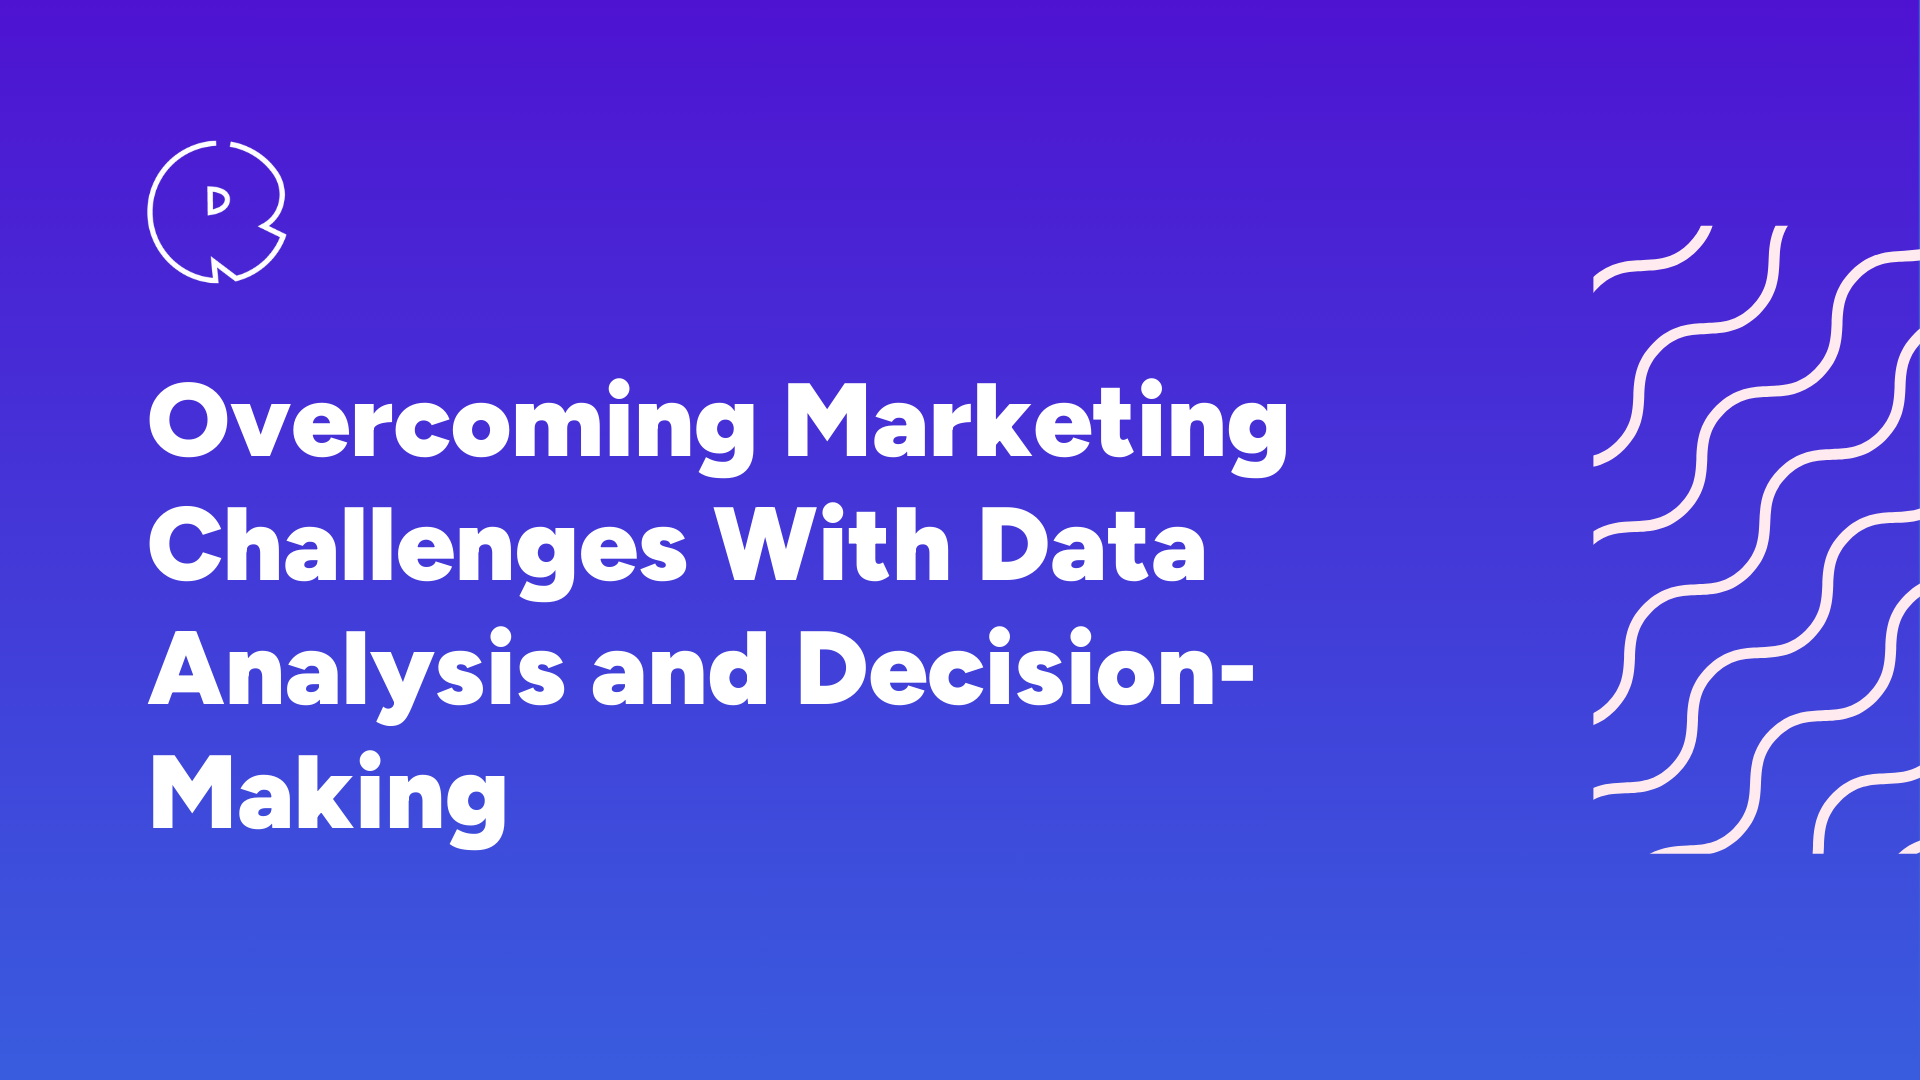 Overcoming Marketing Challenges With Data Analysis and Decision-Making